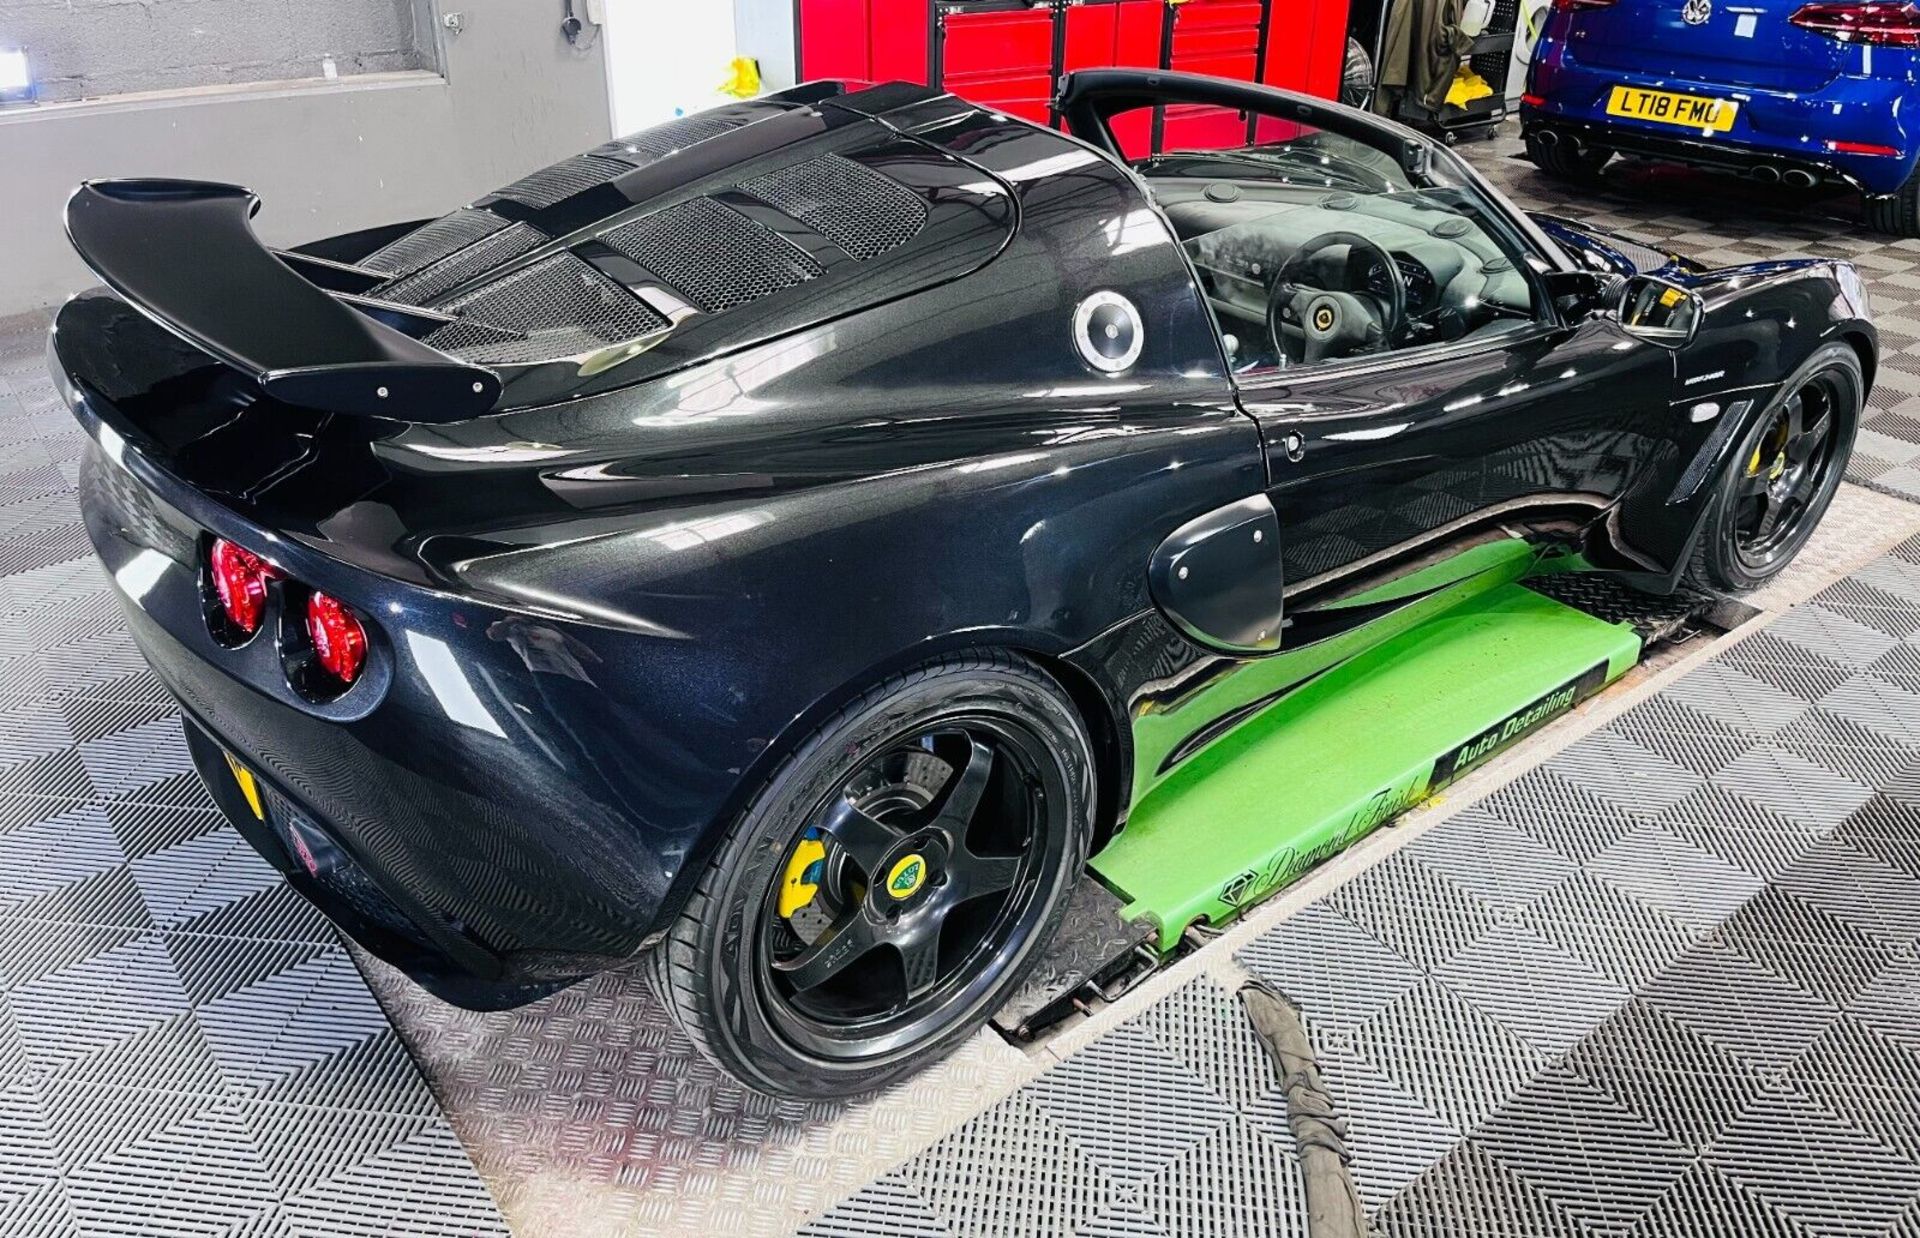 1 OF 50 MADE! 2005 Lotus Exige 240R S2 Limited Edition - 25000 miles - see description for details - Image 6 of 9